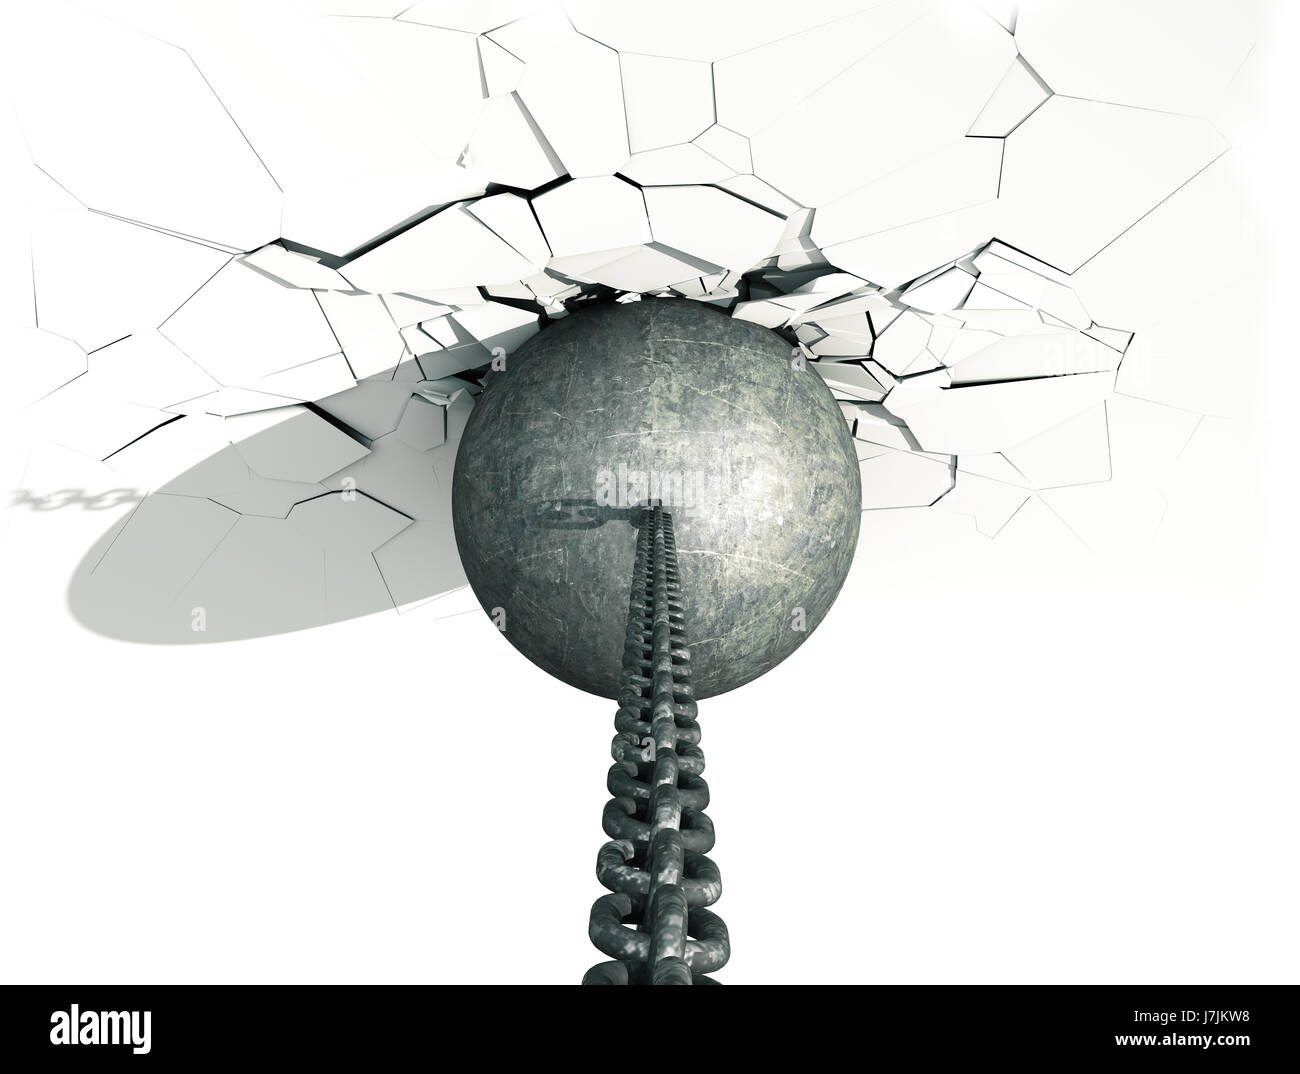 Metallic Wrecking Ball Shattering The White Wall. Top view. 3D Illustration. Stock Photo